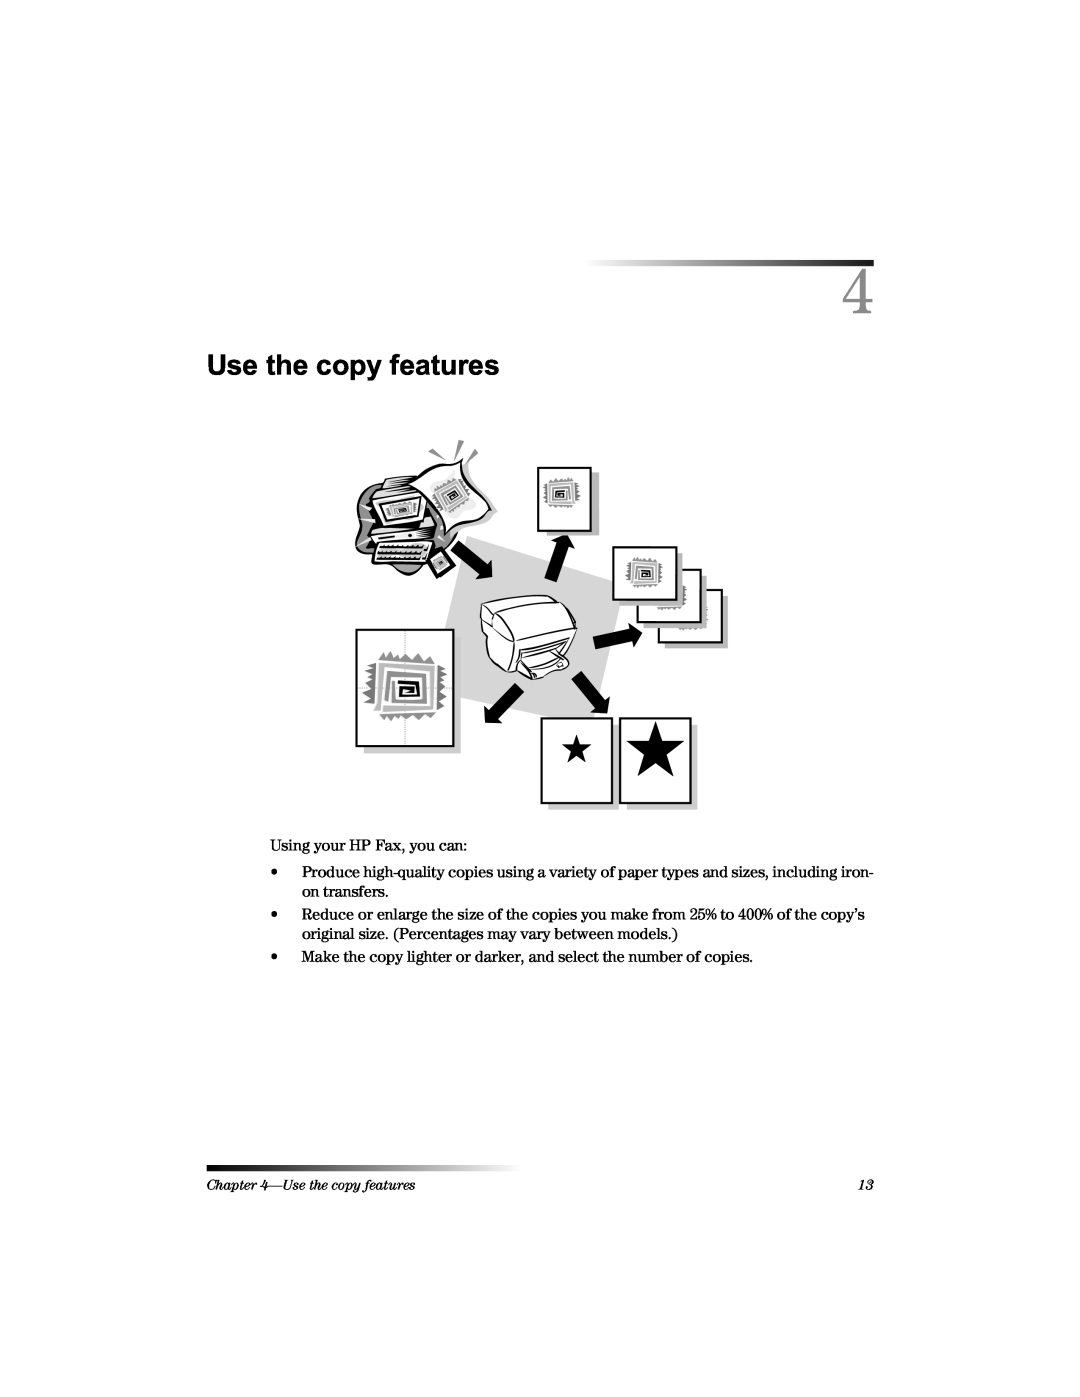 HP 1220 Fax manual 8VHWKHFRS\IHDWXUHV, Using your HP Fax, you can, Use the copy features 